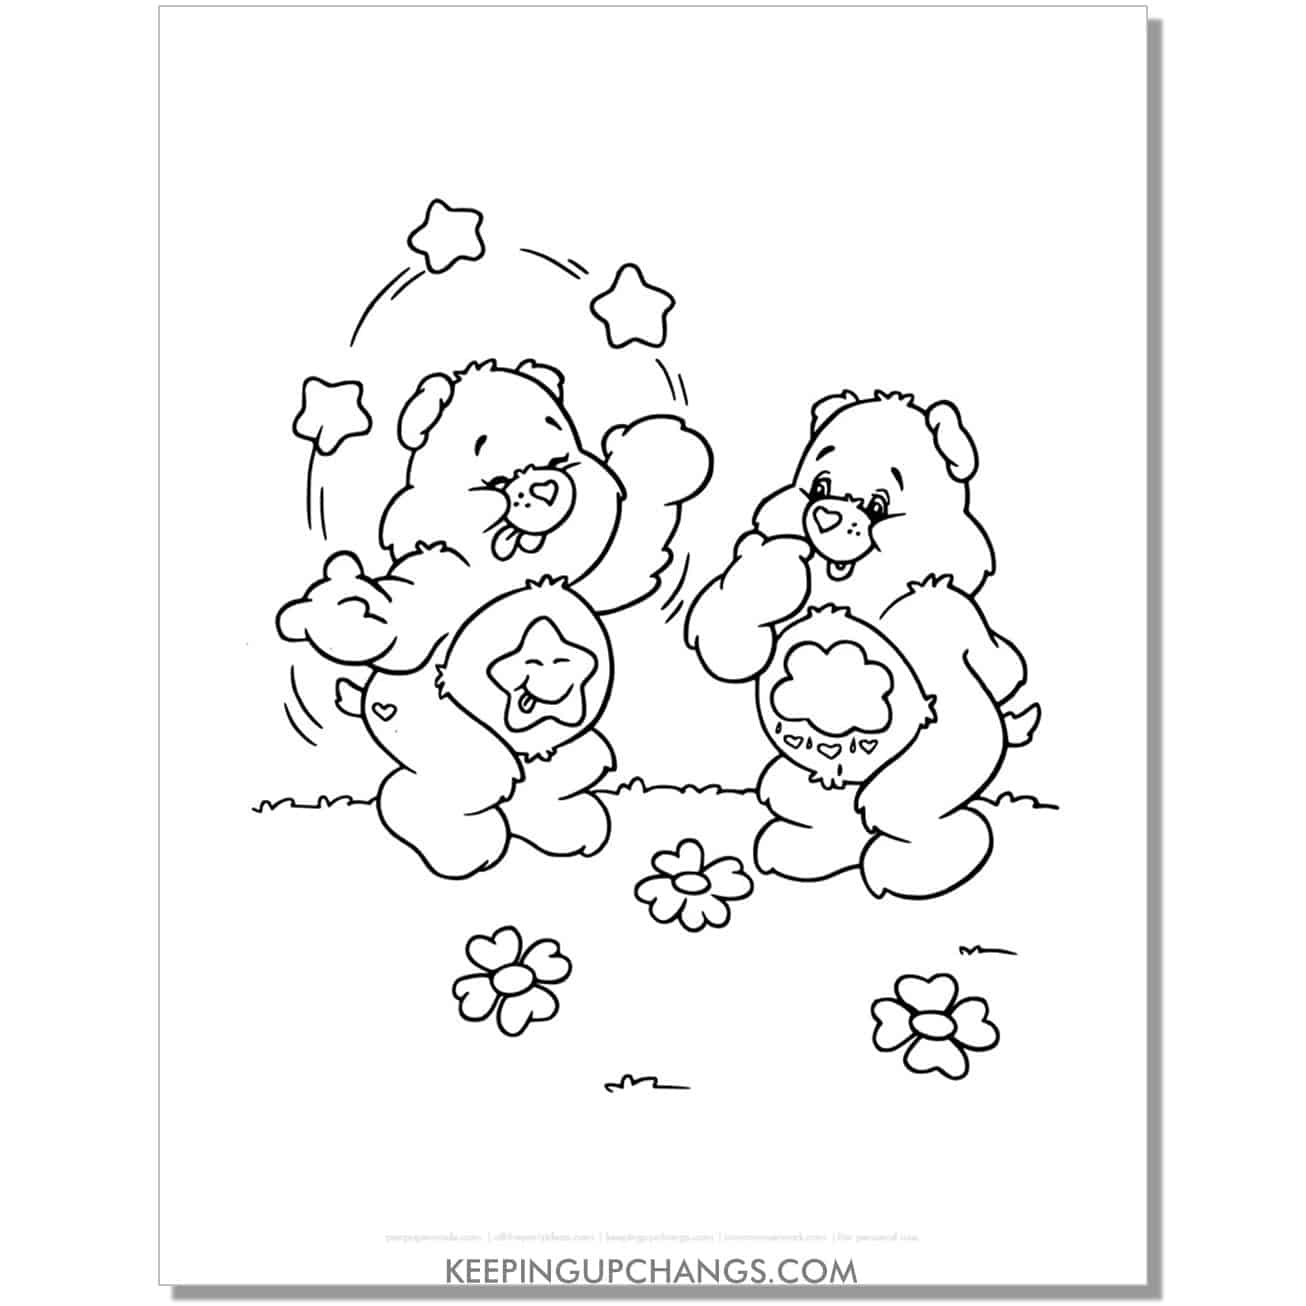 laugh a lot, gloomy bear care bear coloring page, sheet.